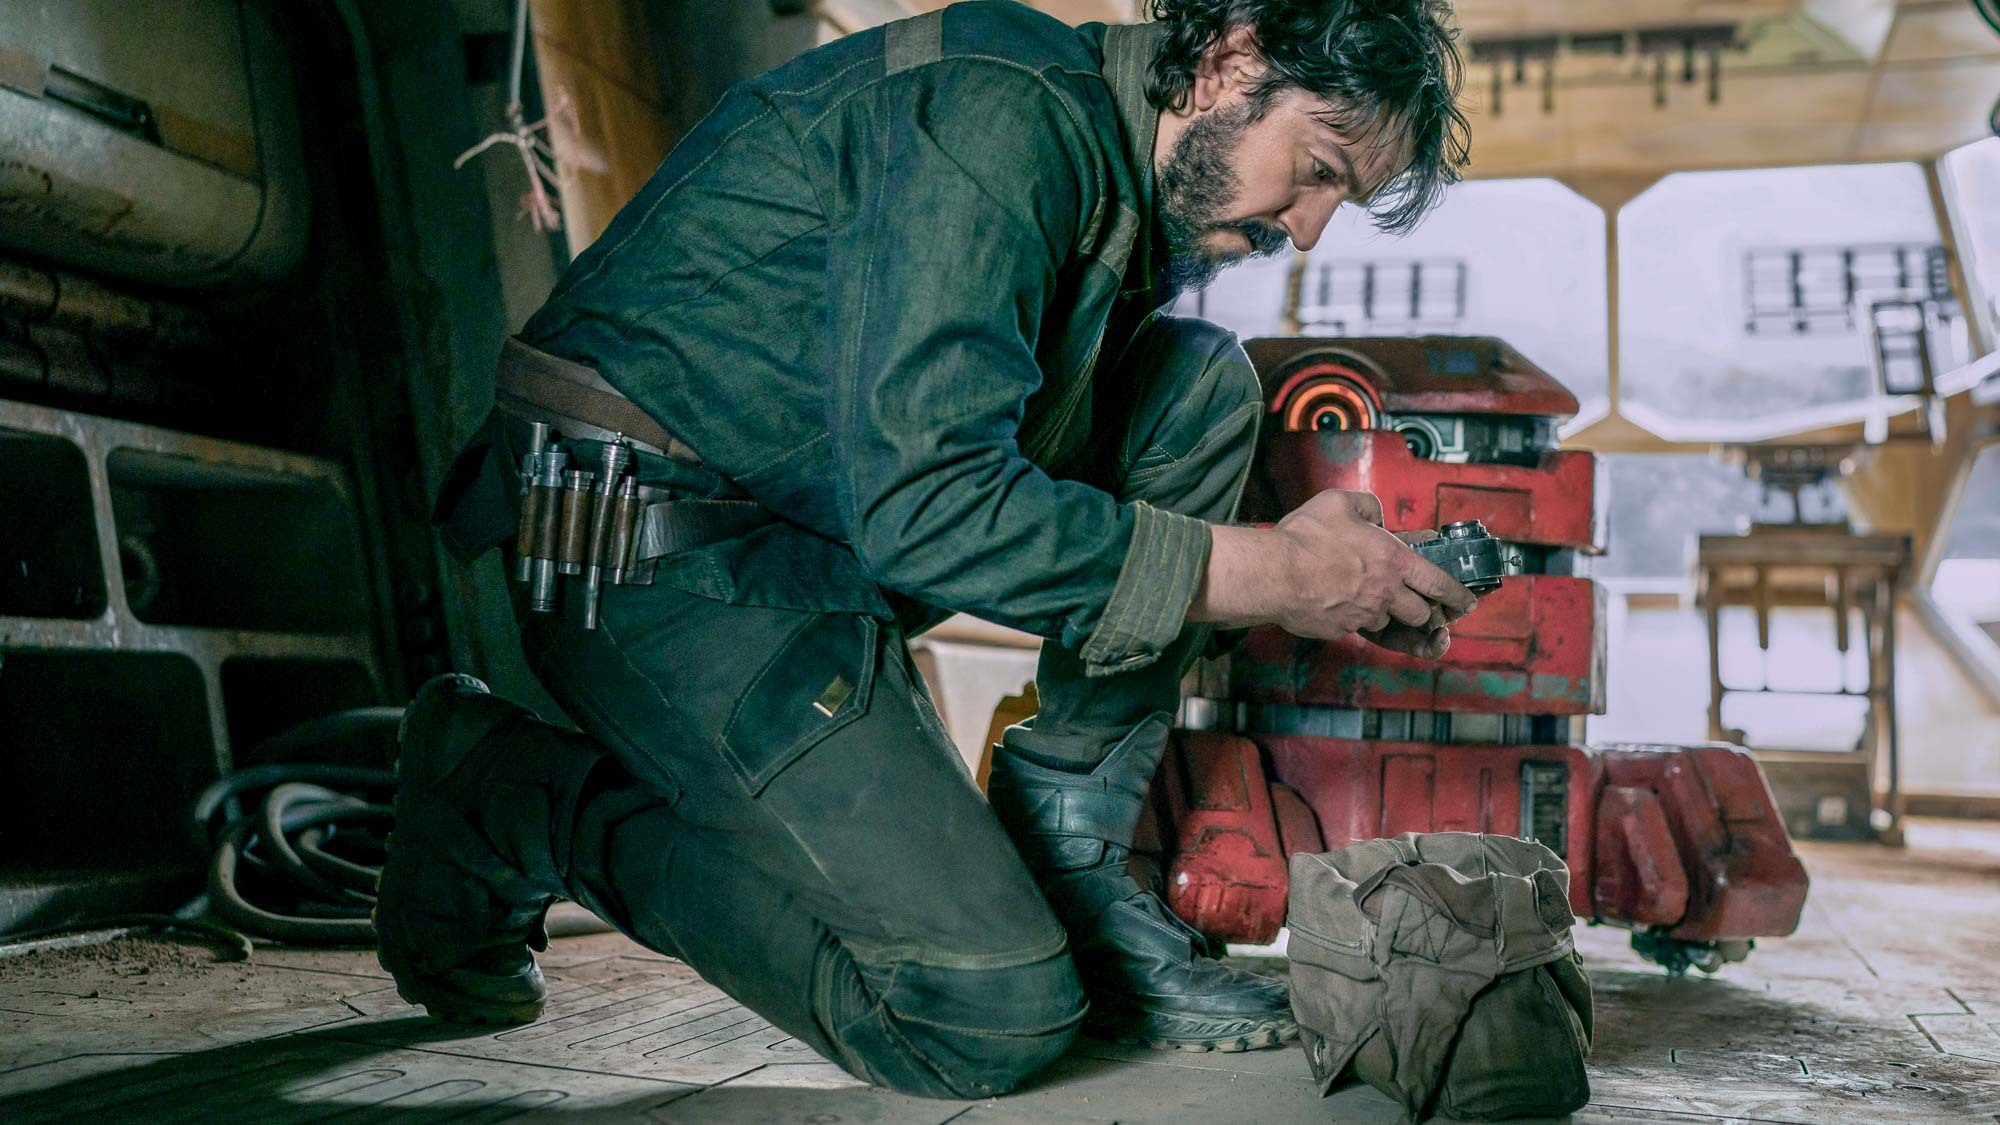 (From left to right) Cassian Andor (Diego Luna) kneels checking something while B2EMO (Dave Chapman) stands to his left in Andor